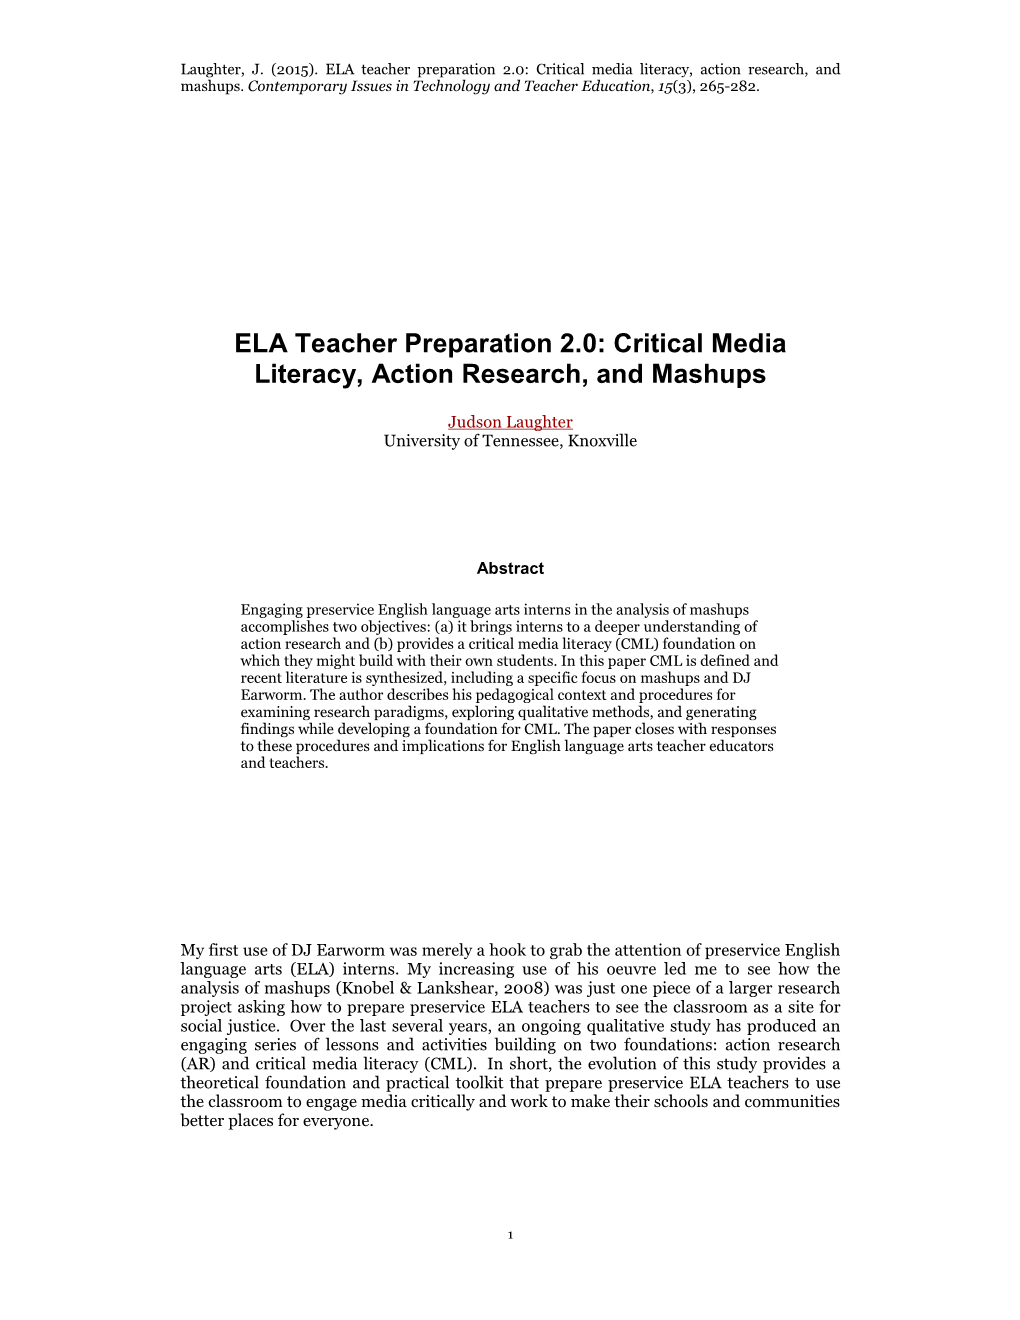 Critical Media Literacy, Action Research, and Mashups